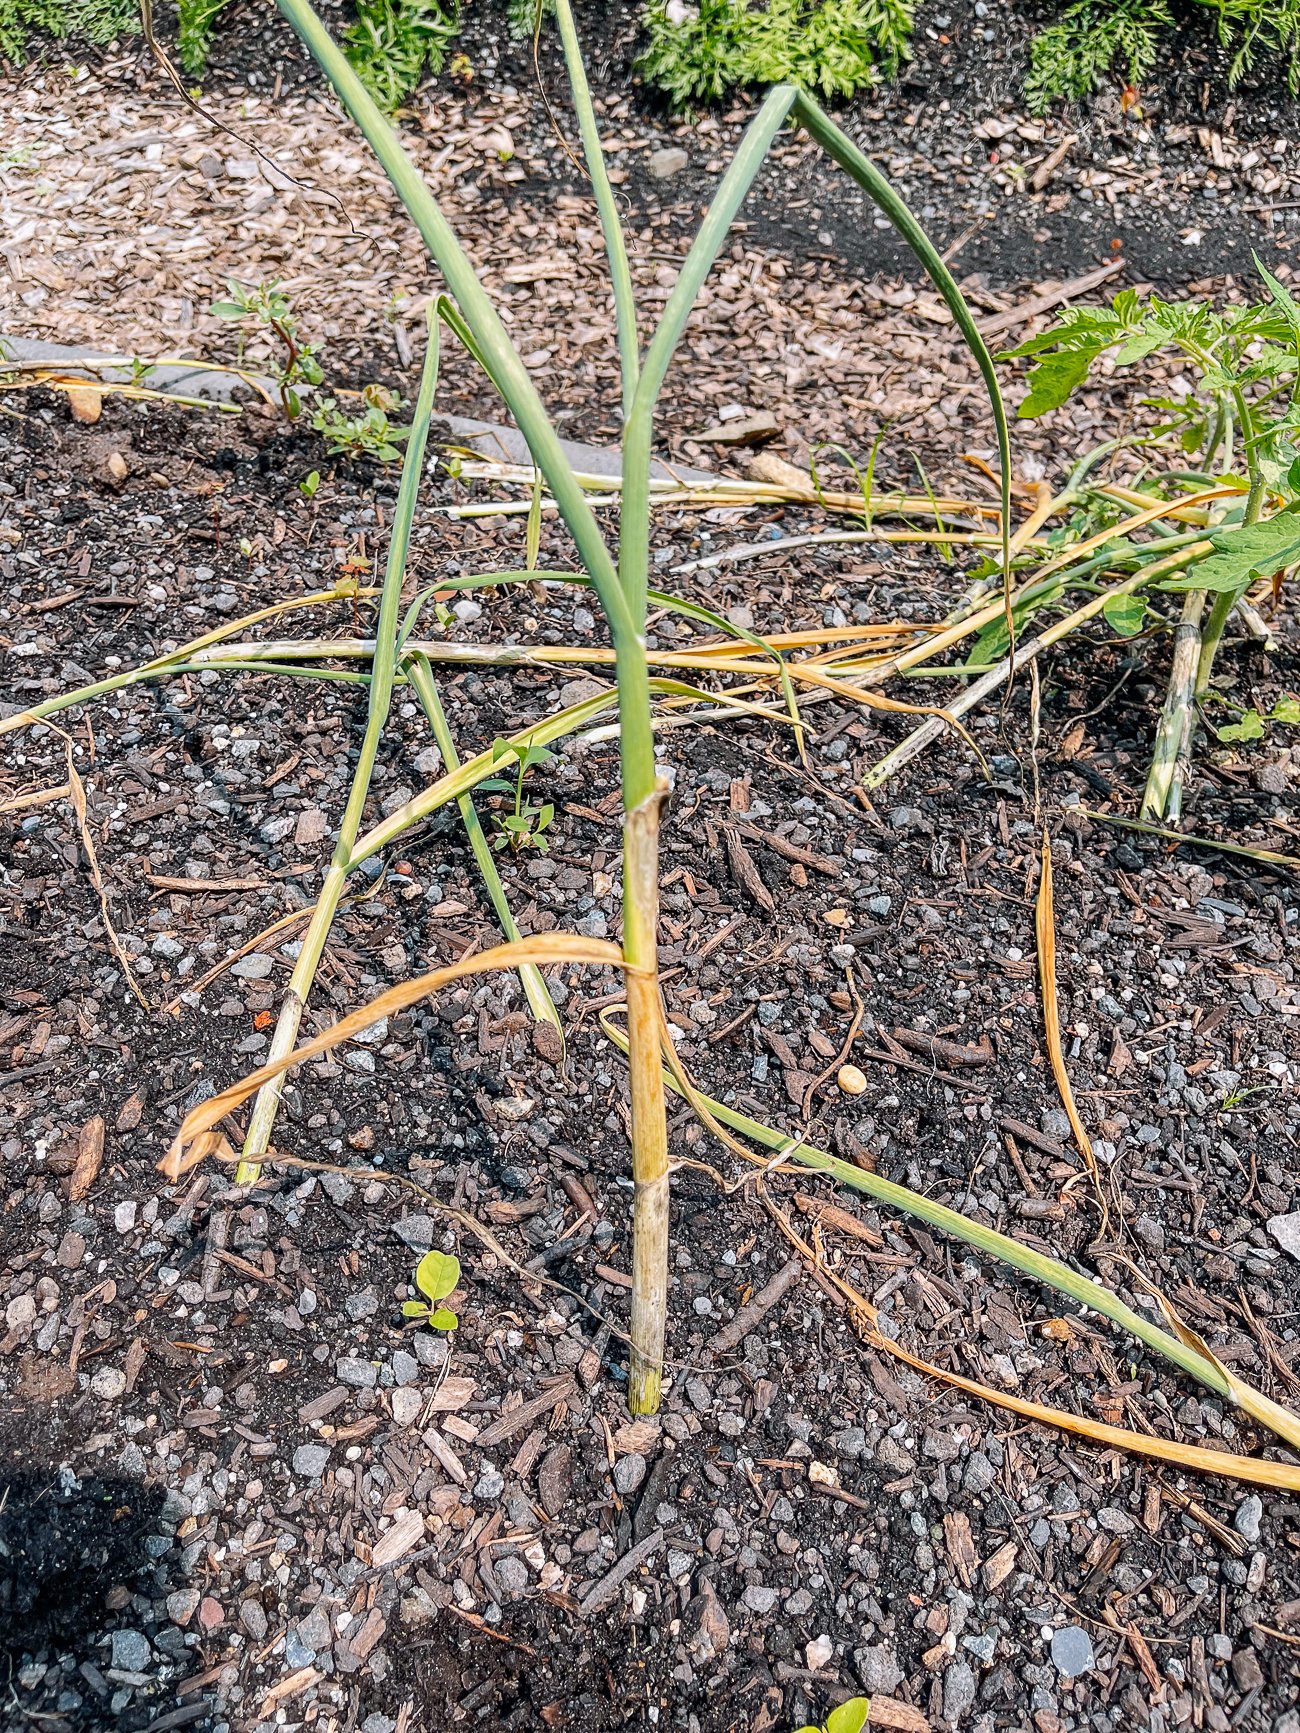 garlic stem with browned outer leaves